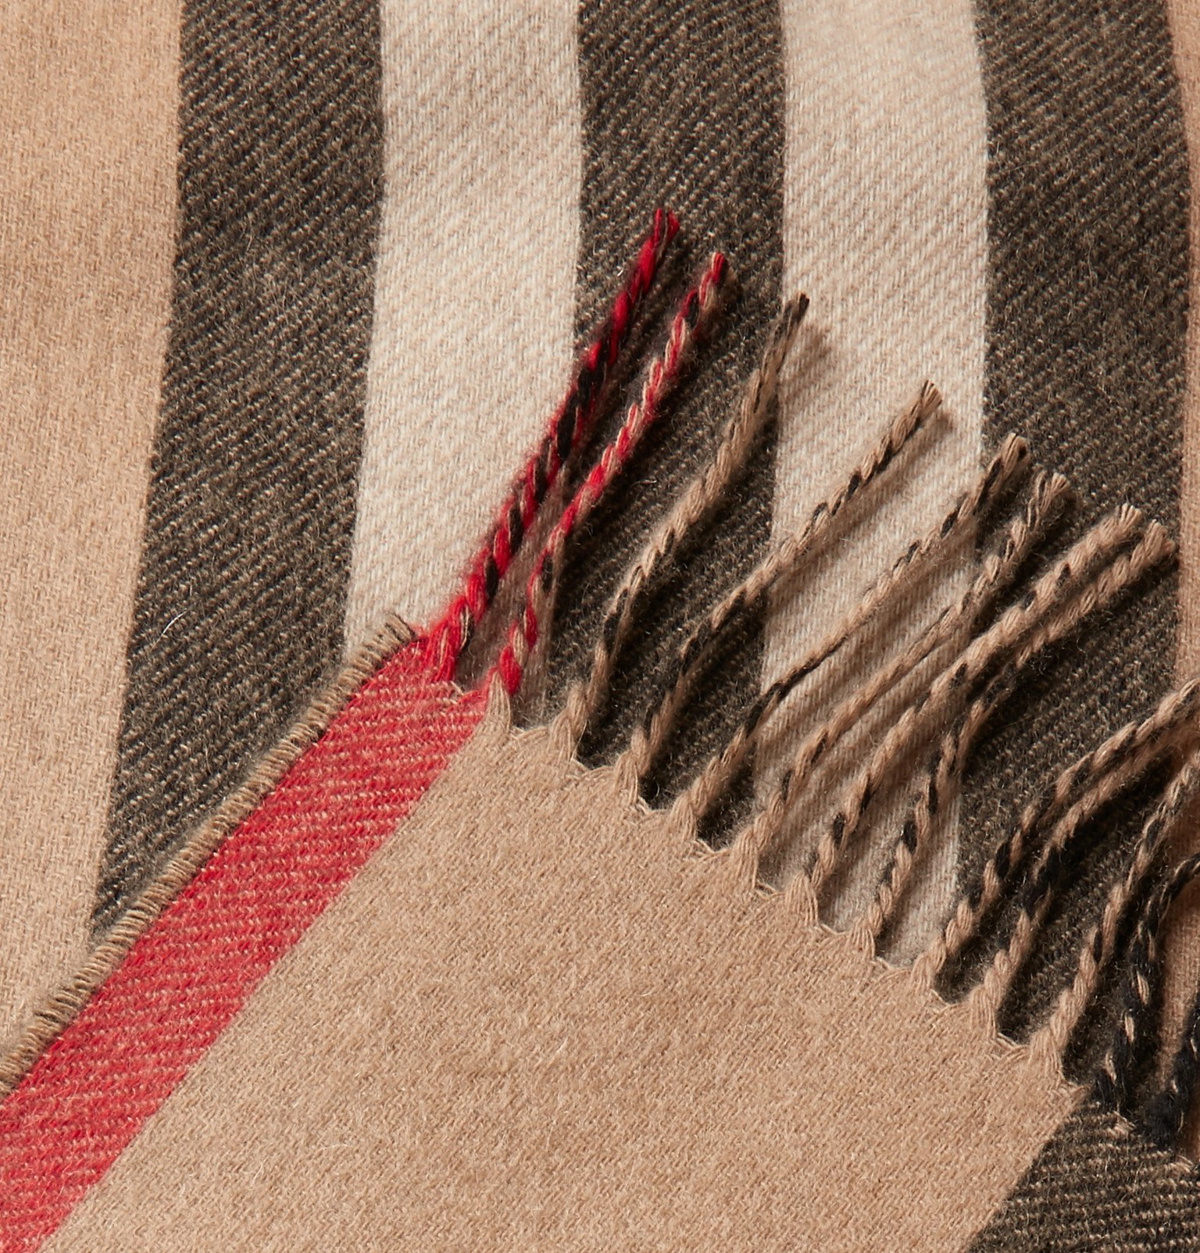 Burberry Reversible Check Cashmere Scarf - Neutrals